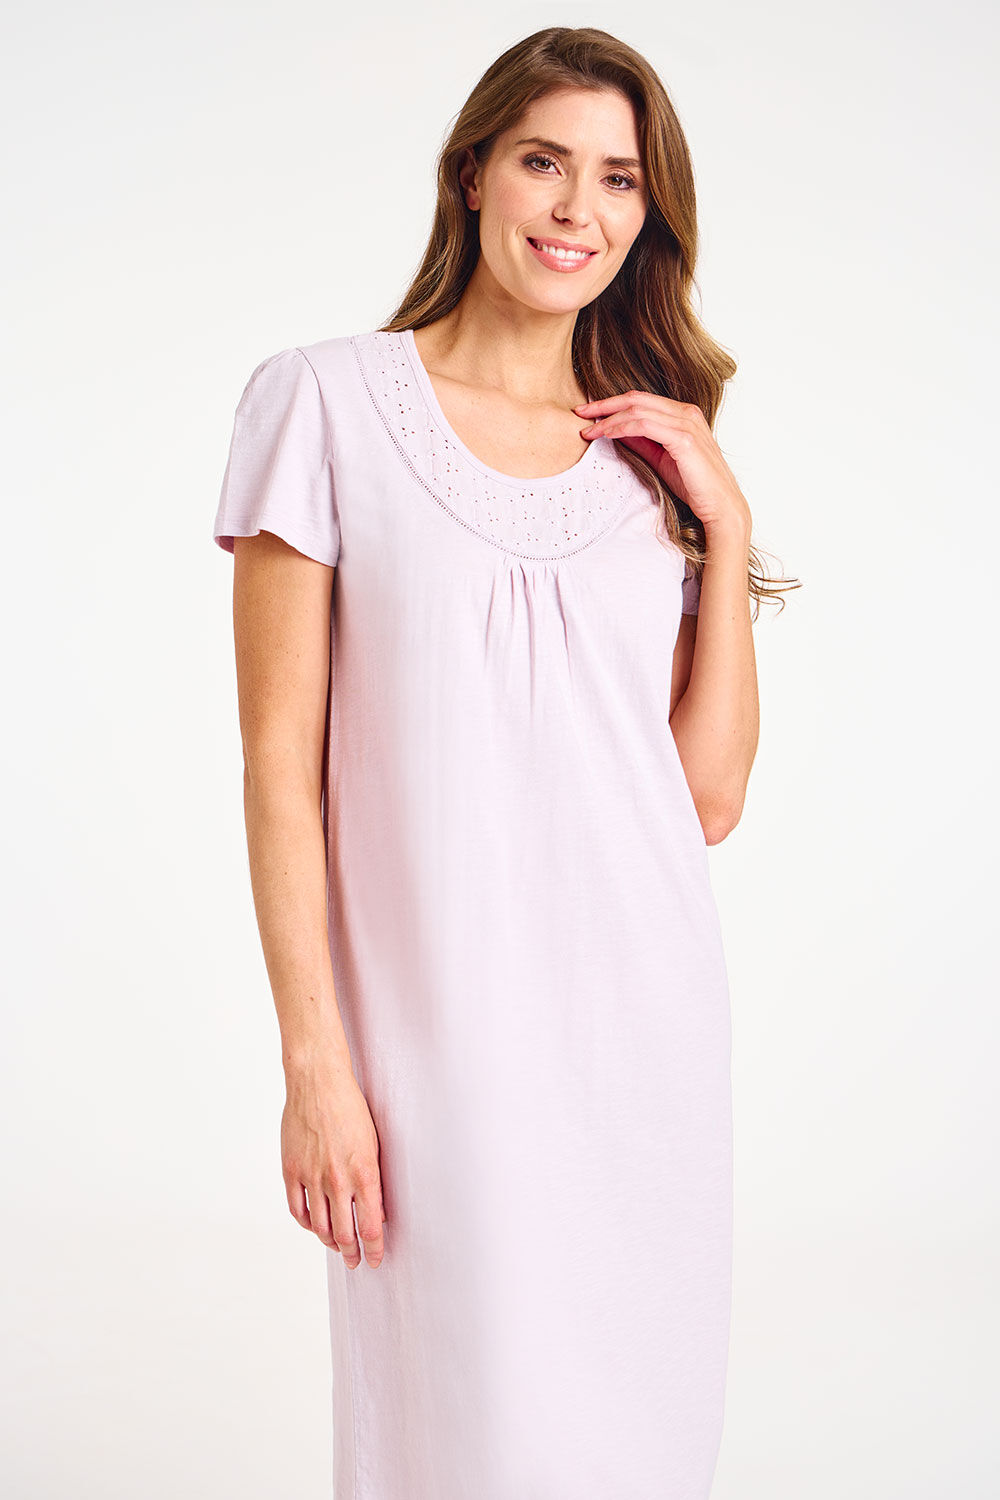 Bonmarche Lilac Short Sleeve Broderie and Jersey Nightdress, Size: 16